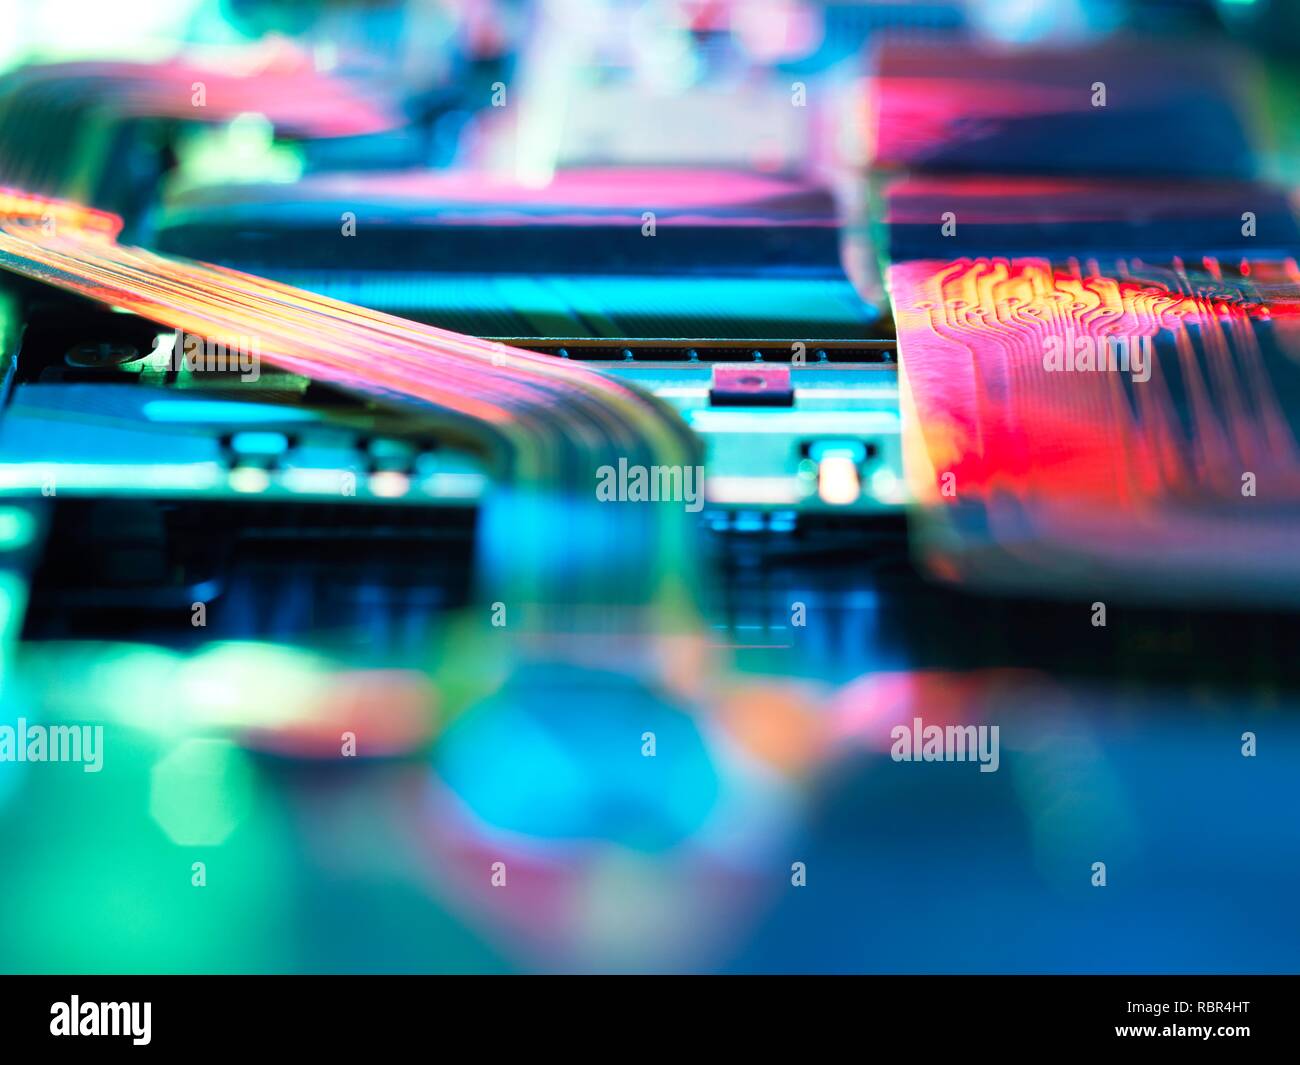 Electronic circuitry on a laptop computer. Stock Photo